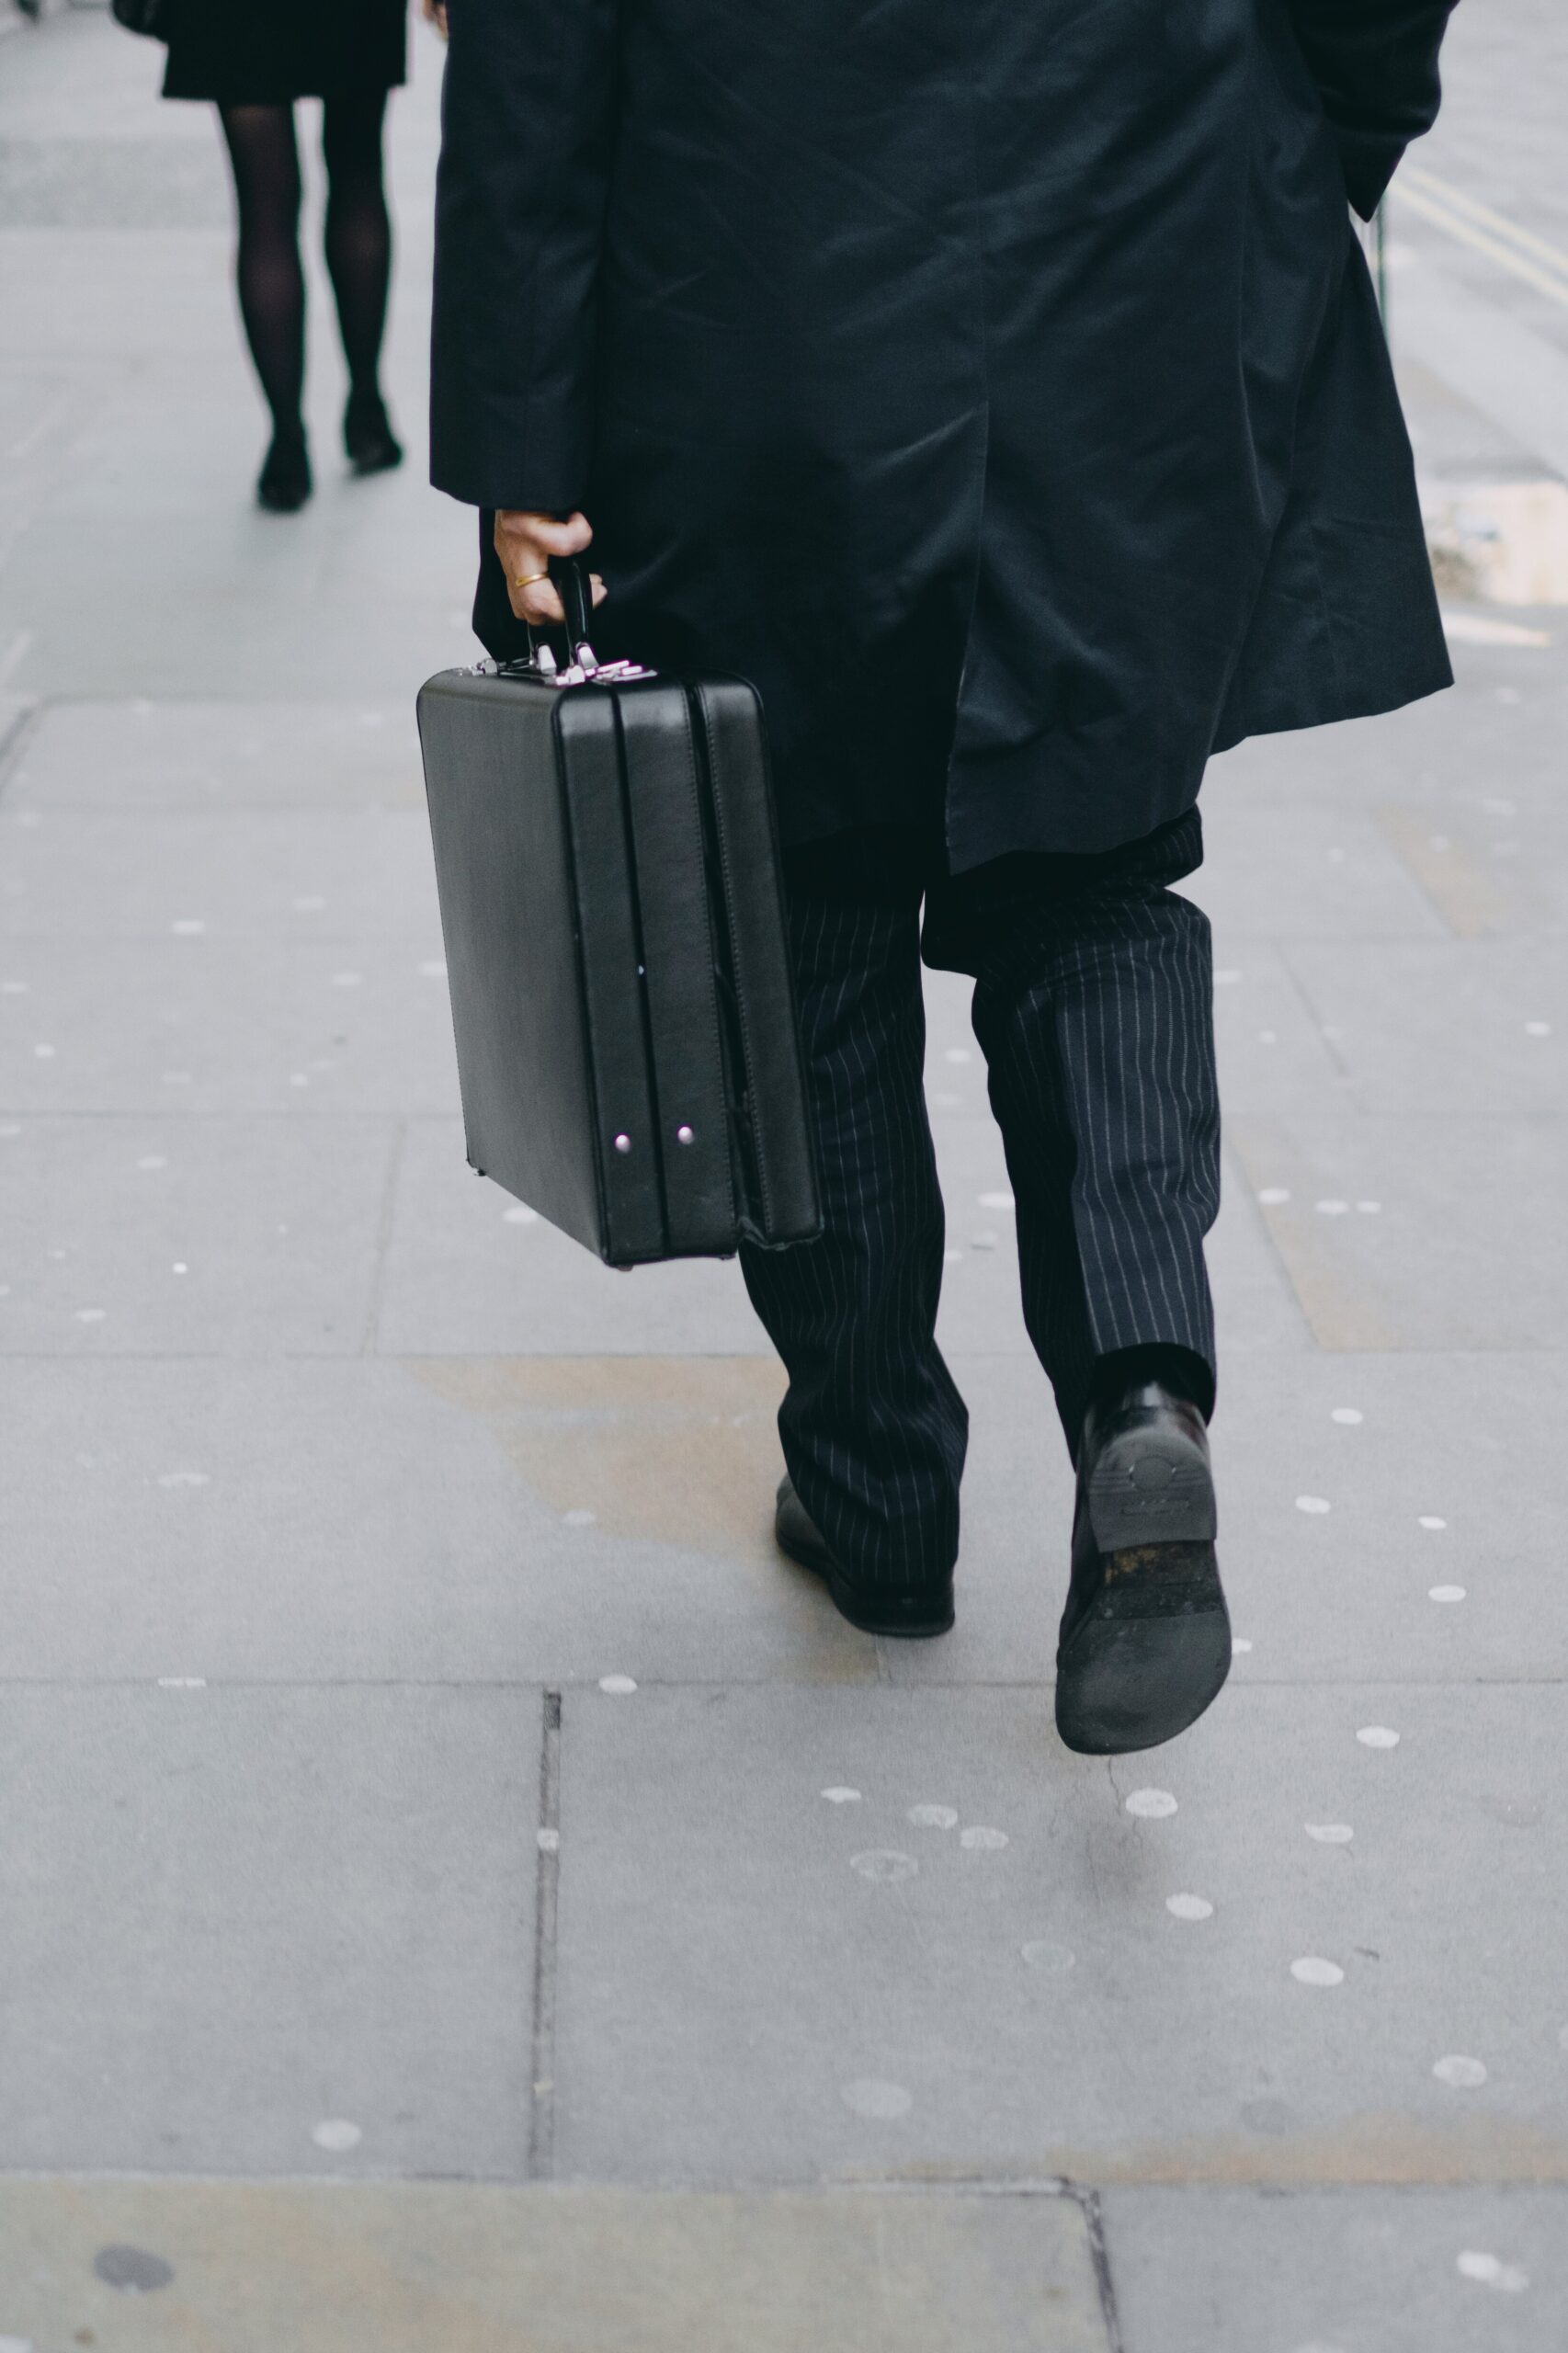 Man carrying briefcase